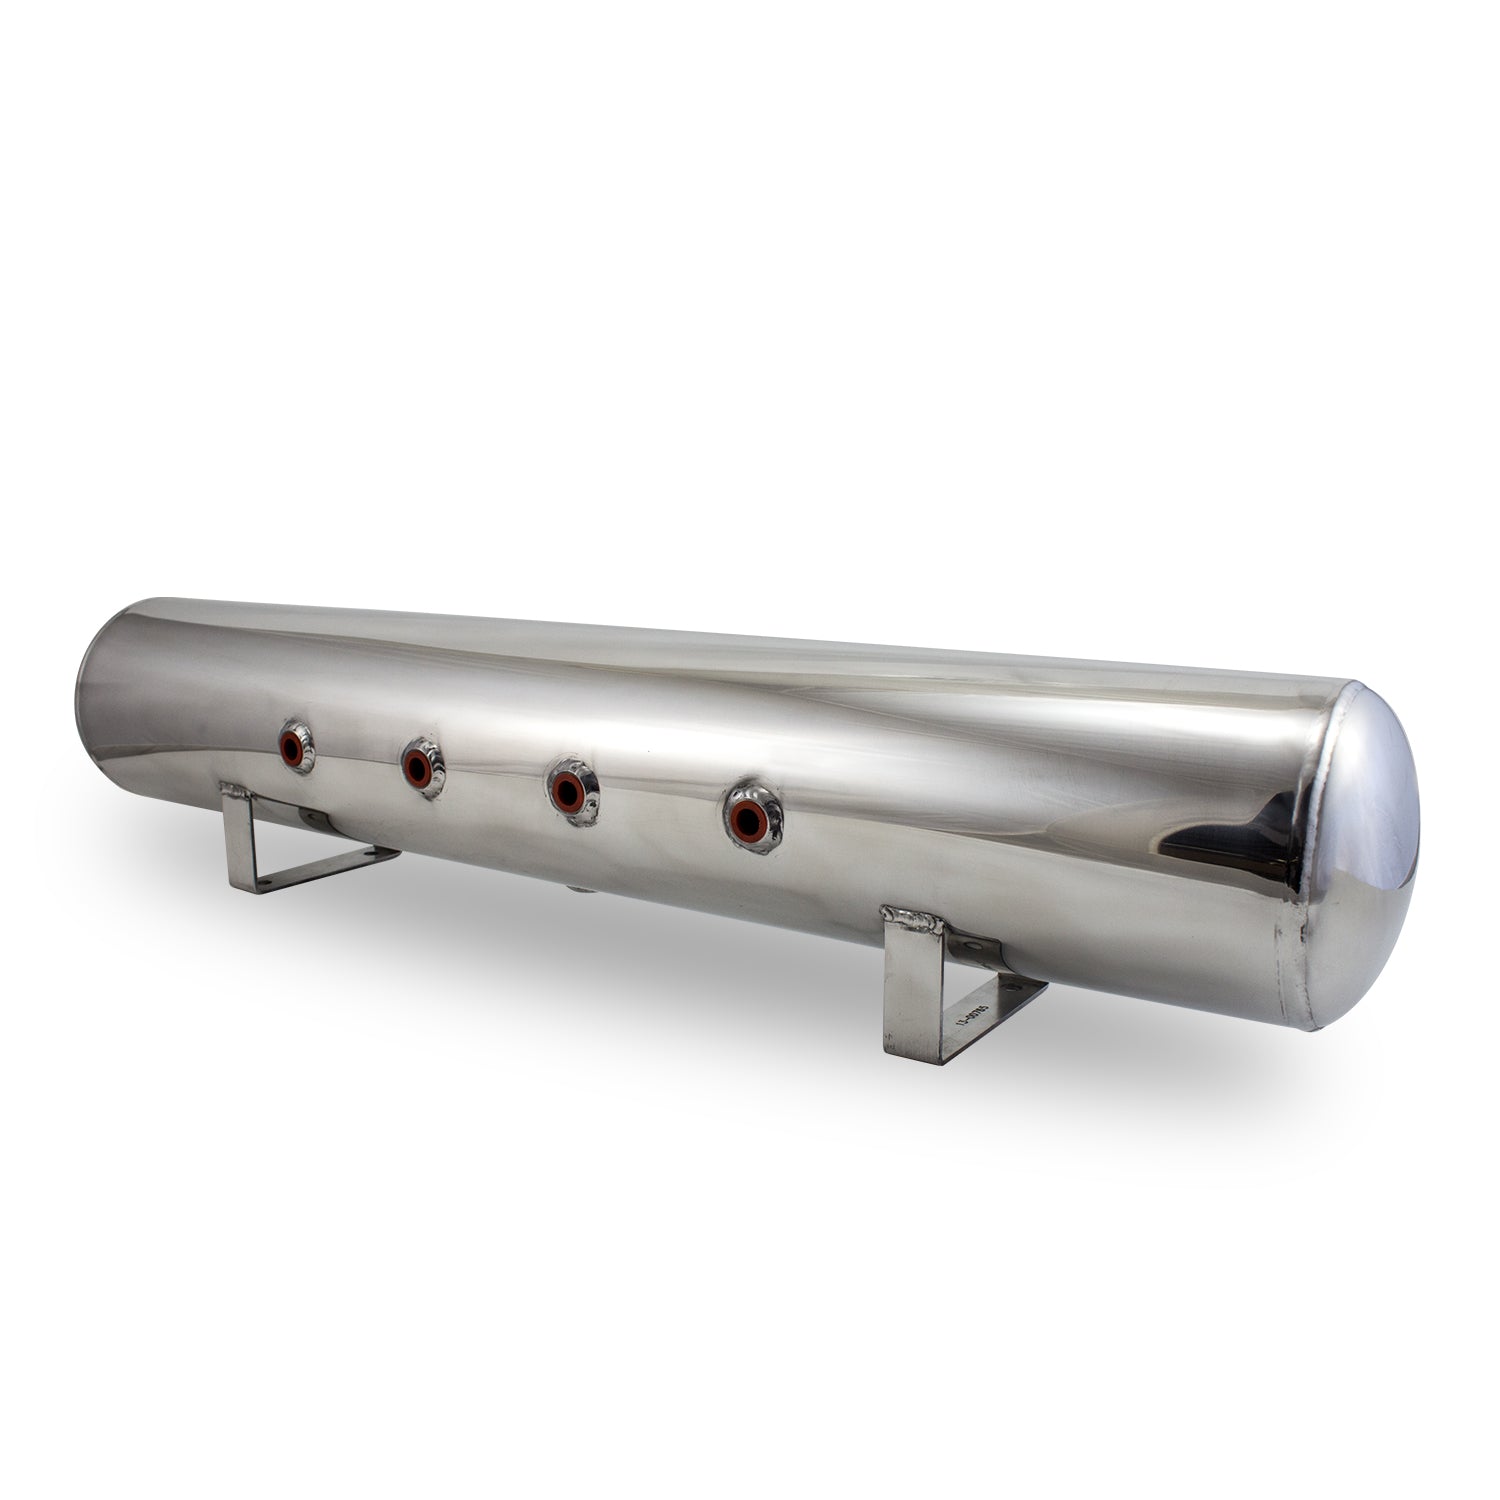 4 Gal Aluminum Air Tank; (4) 1/4 in.  face ports & (2) 3/8 in.  end ports; 6 in. D X 30 in. L light weight polished aluminum 200PSI maximum operating pressure.